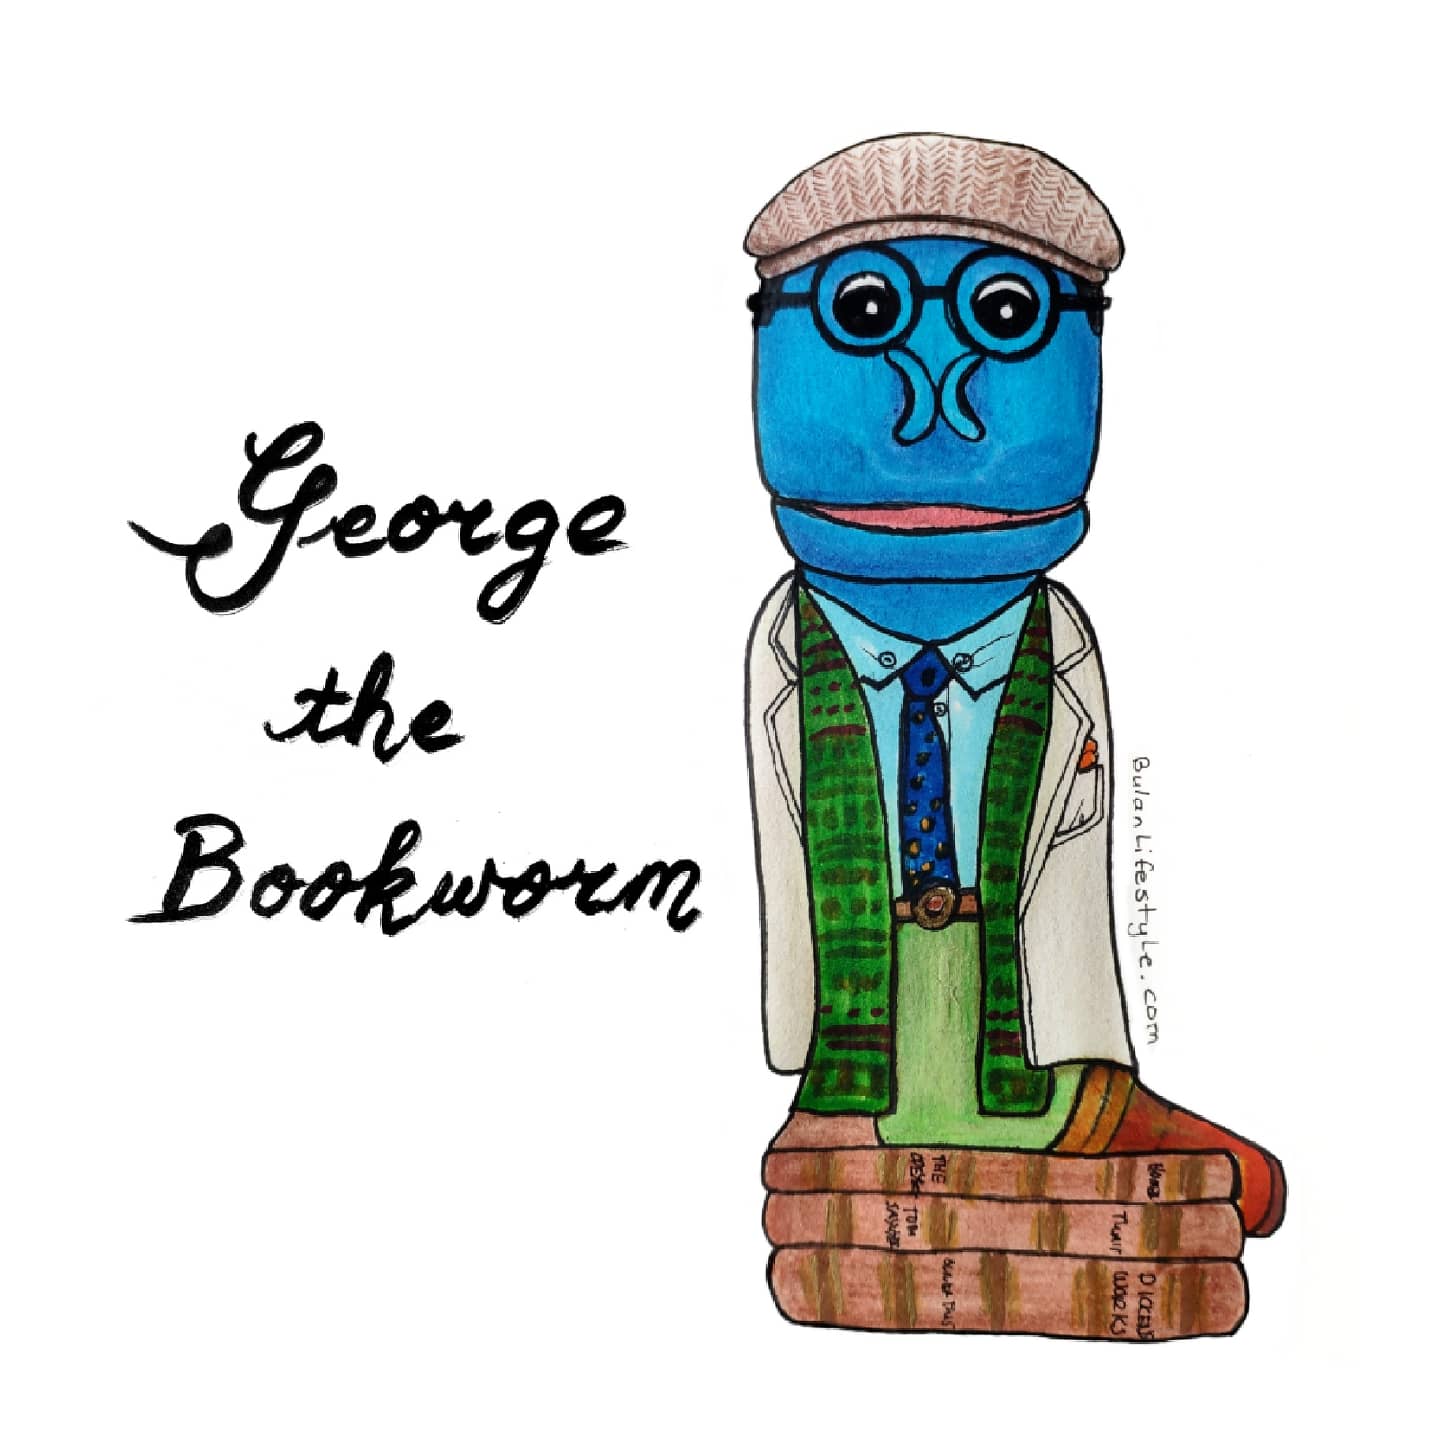 George the bookworm